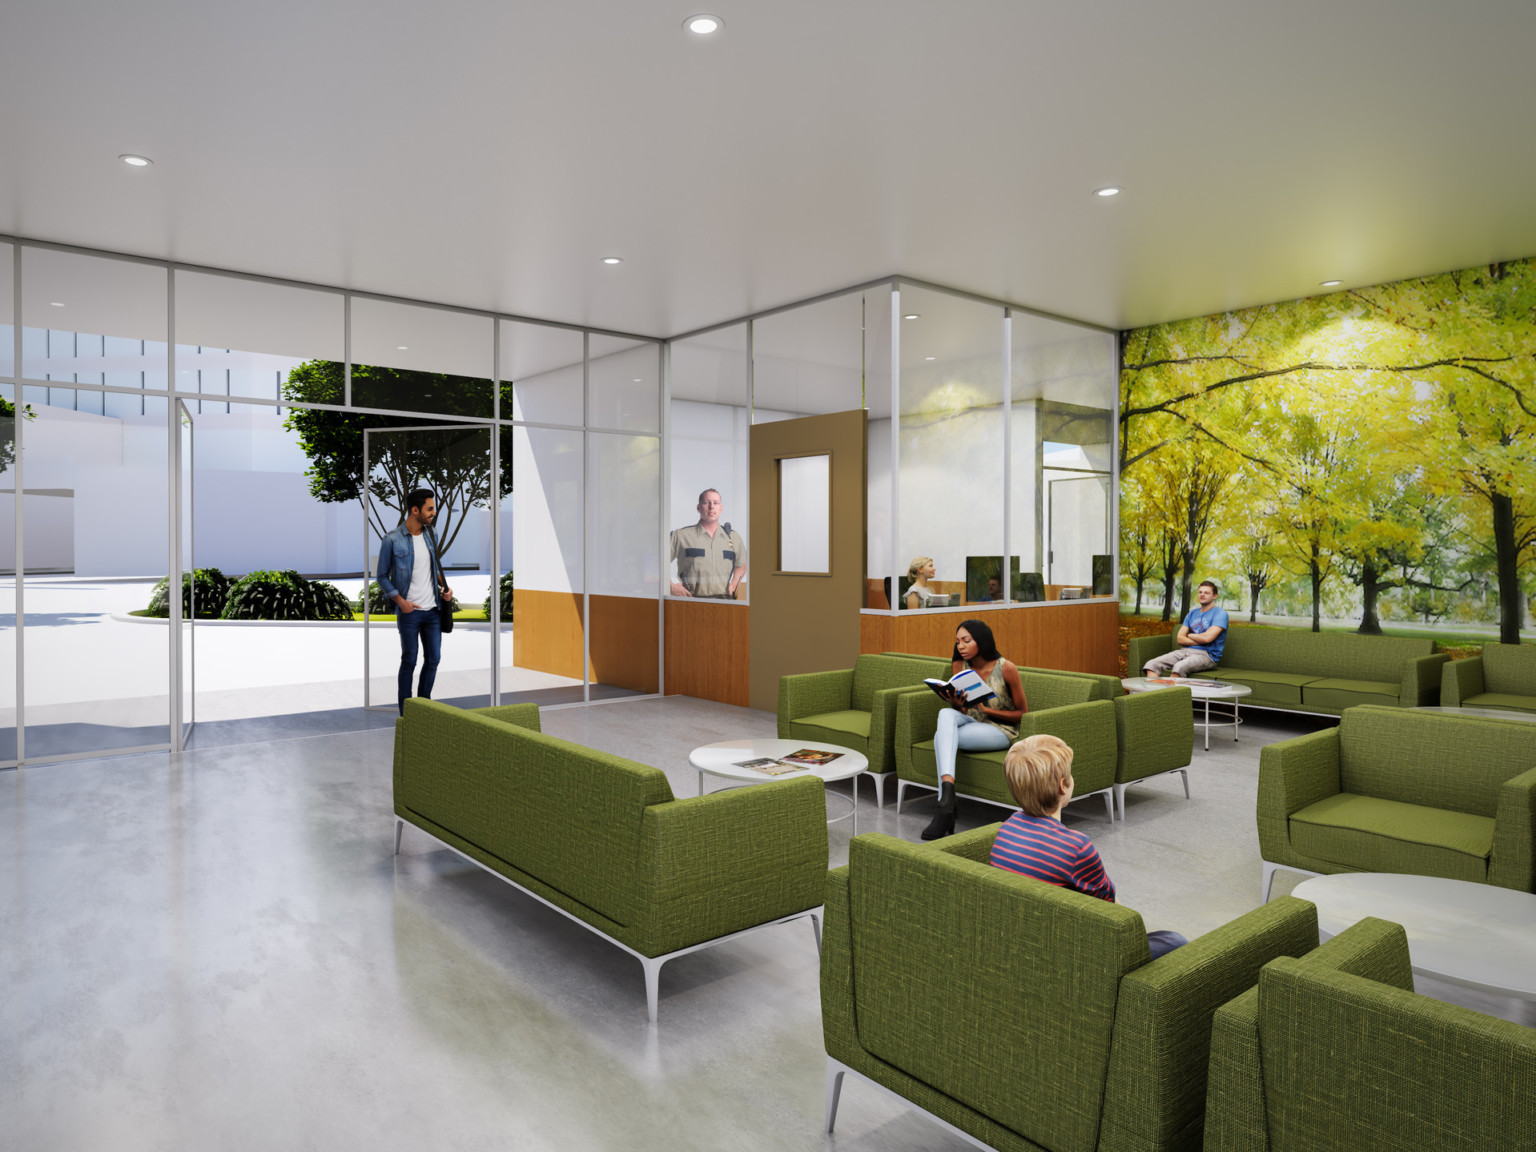 Seating area at entry with green armchairs. A mural of green trees is on the right wall next to a glass office.